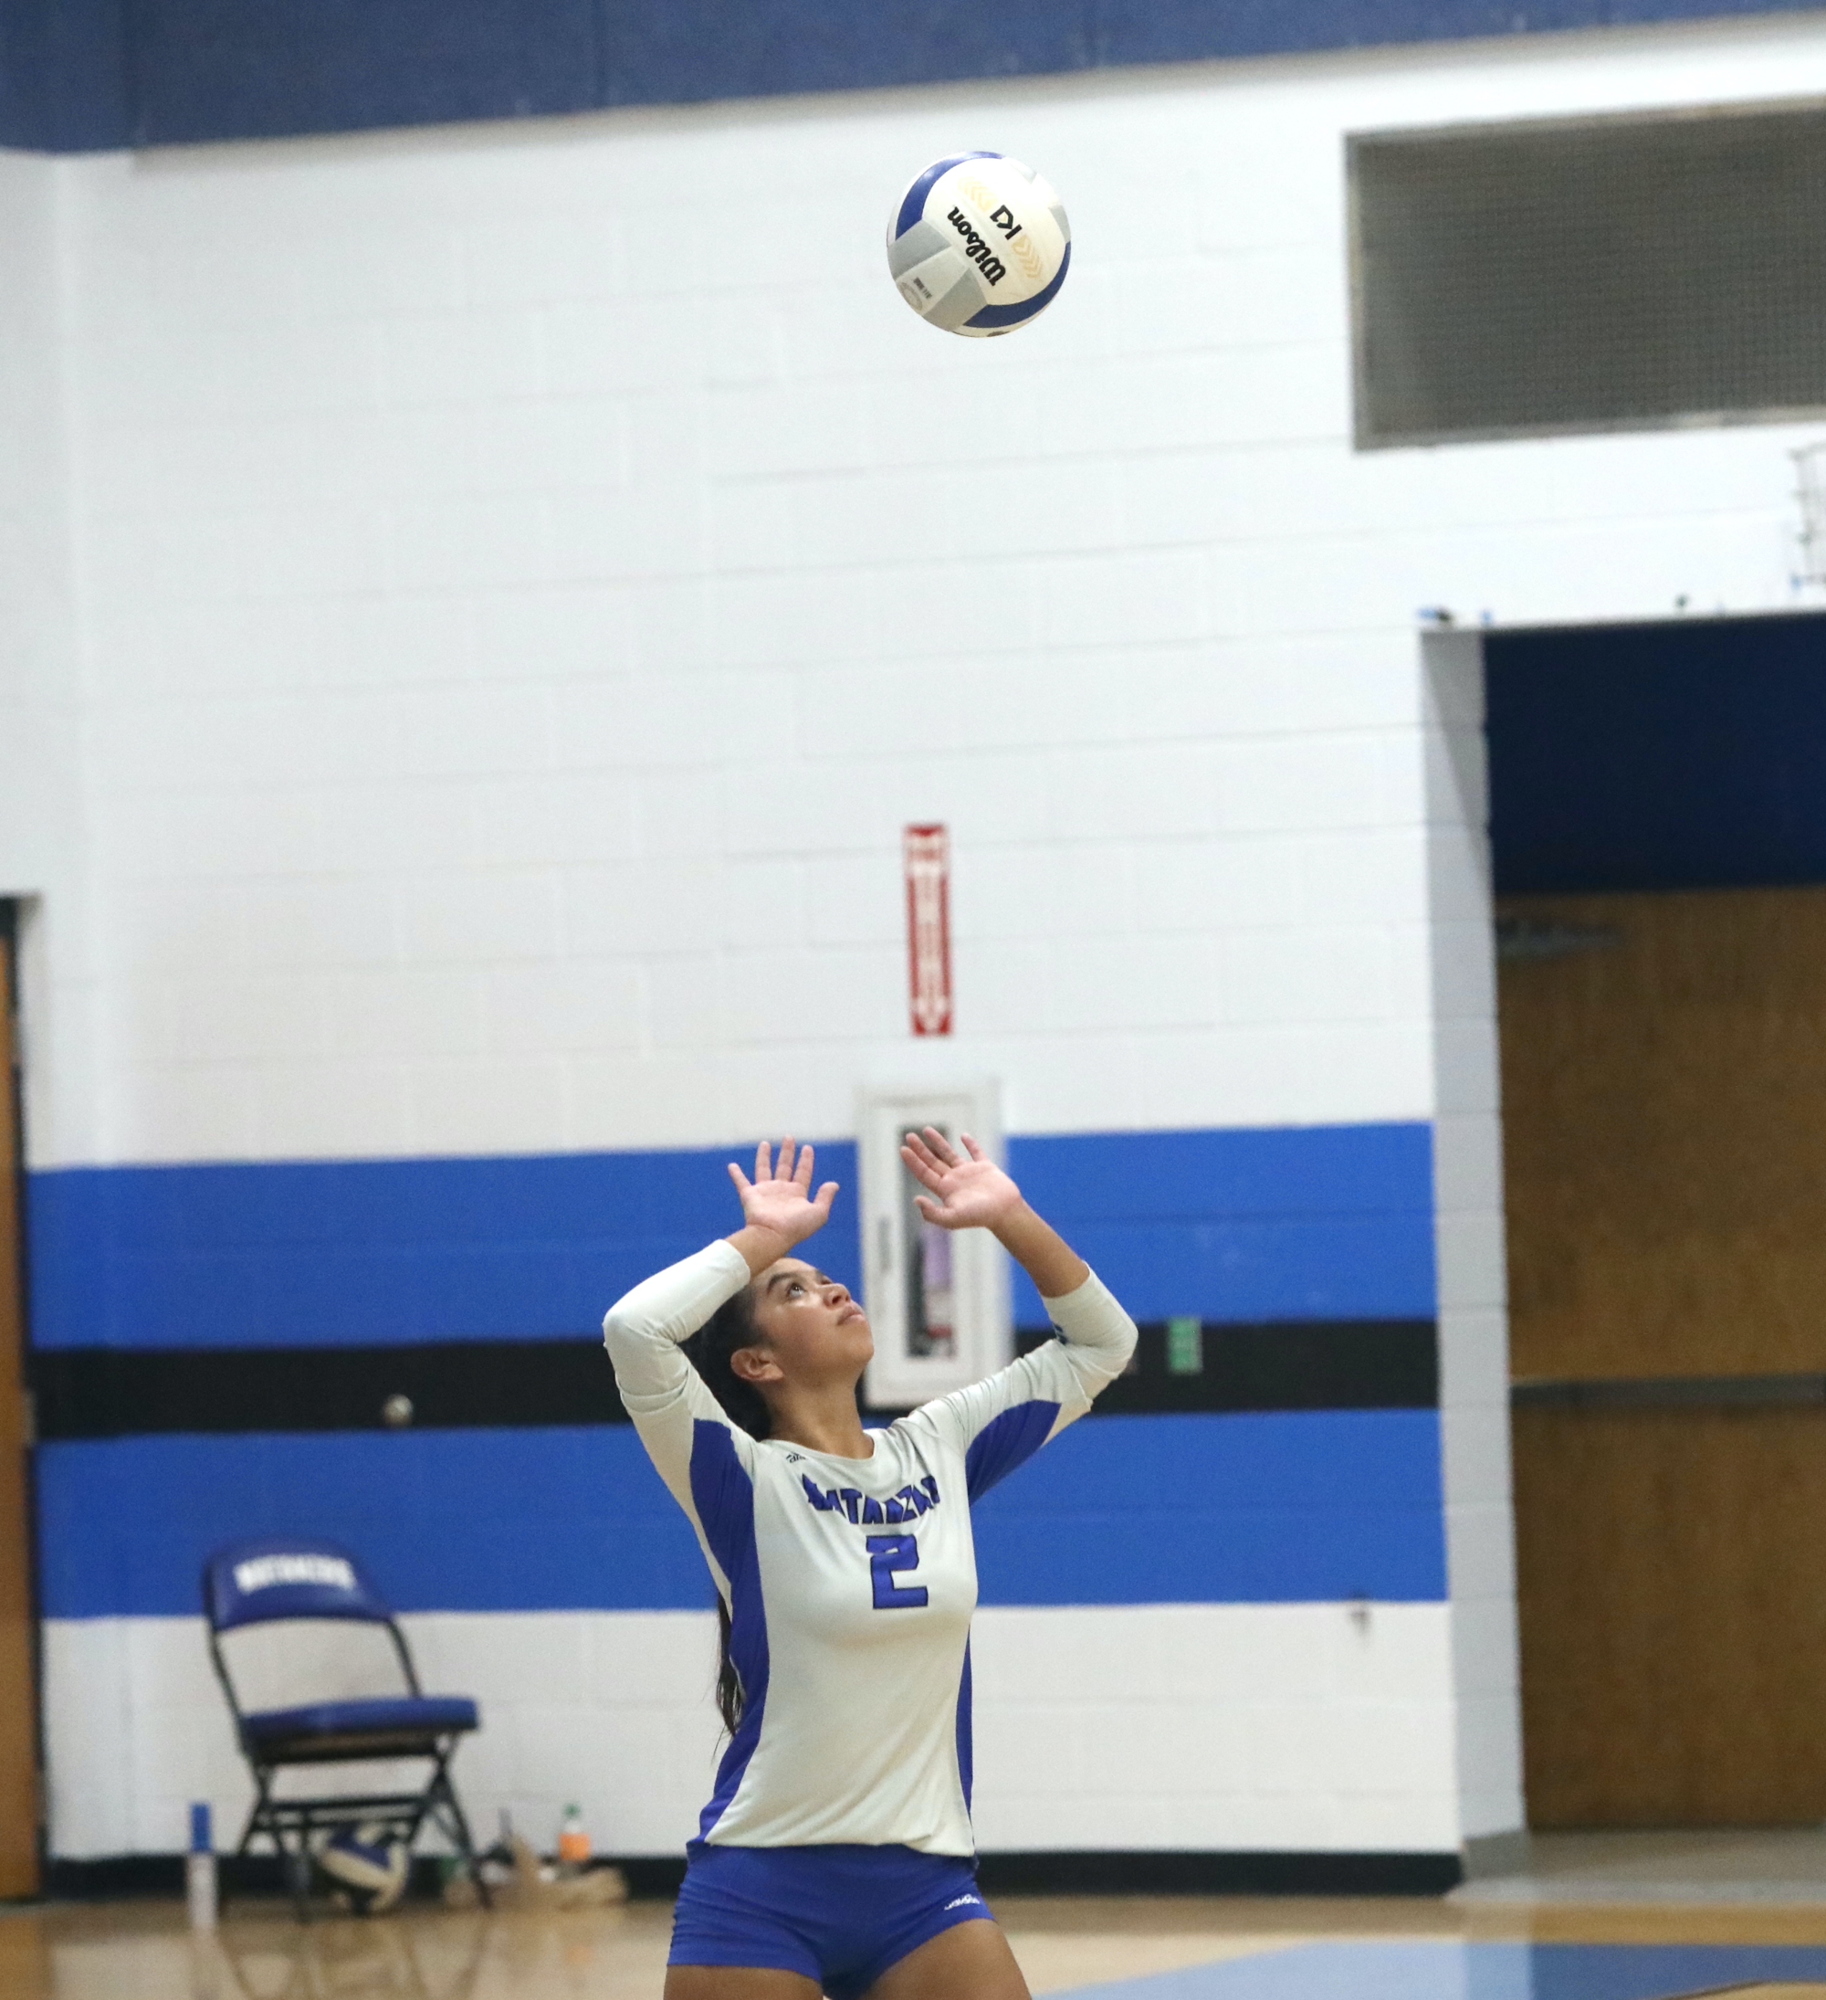 Matanzas senior Sydney Moses sets for a teammate in the Pirates' final home match of the season against Tocoi Creek. Photo by Brent Woronoff